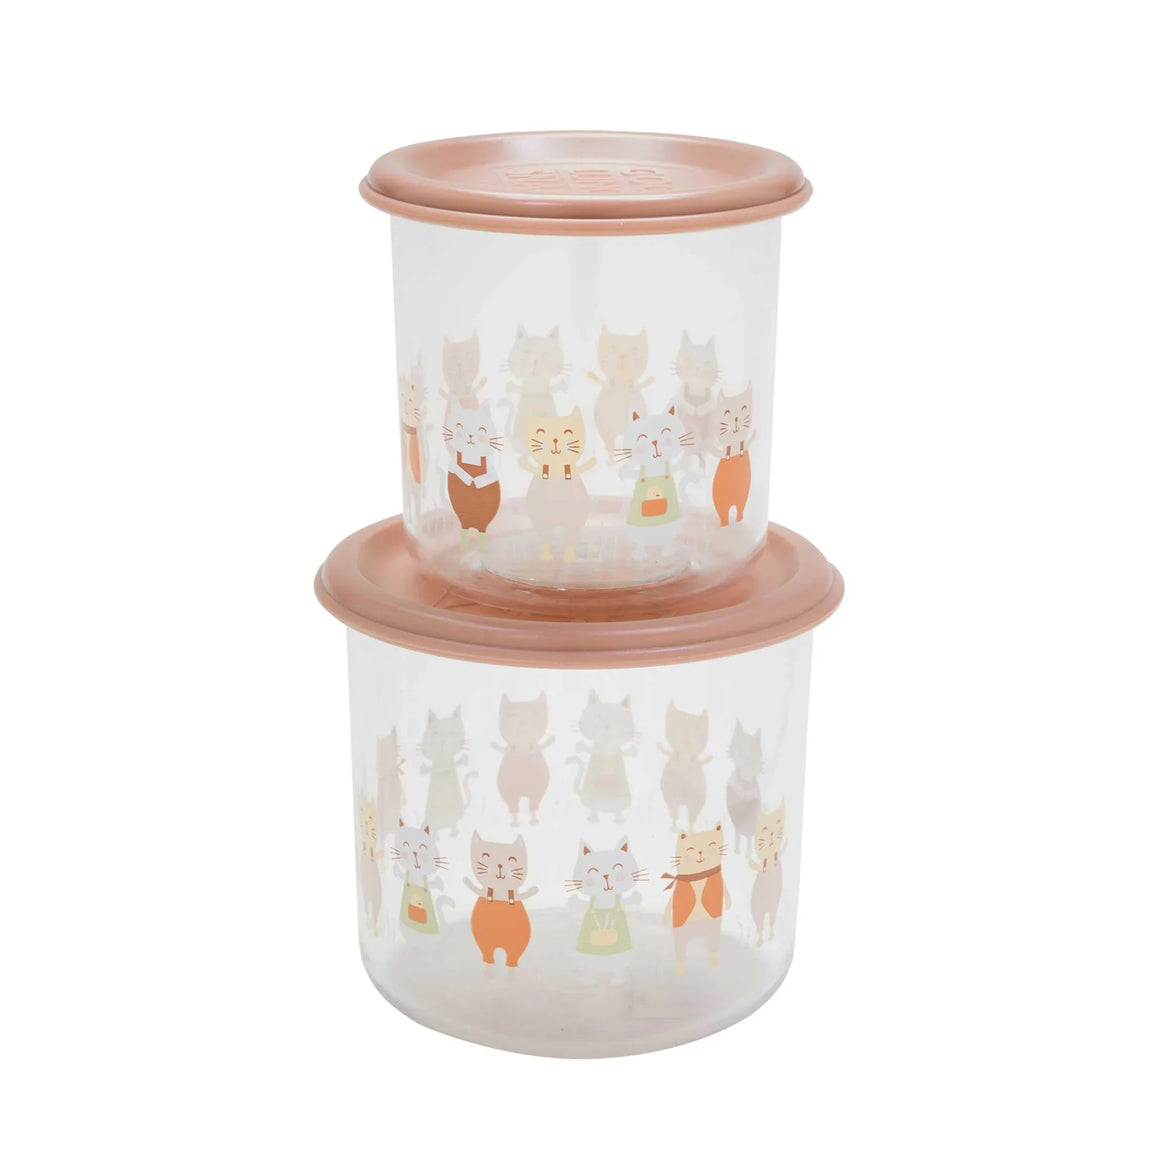 Prairie Kitty - Good Lunch Containers - Large 2 pcs.